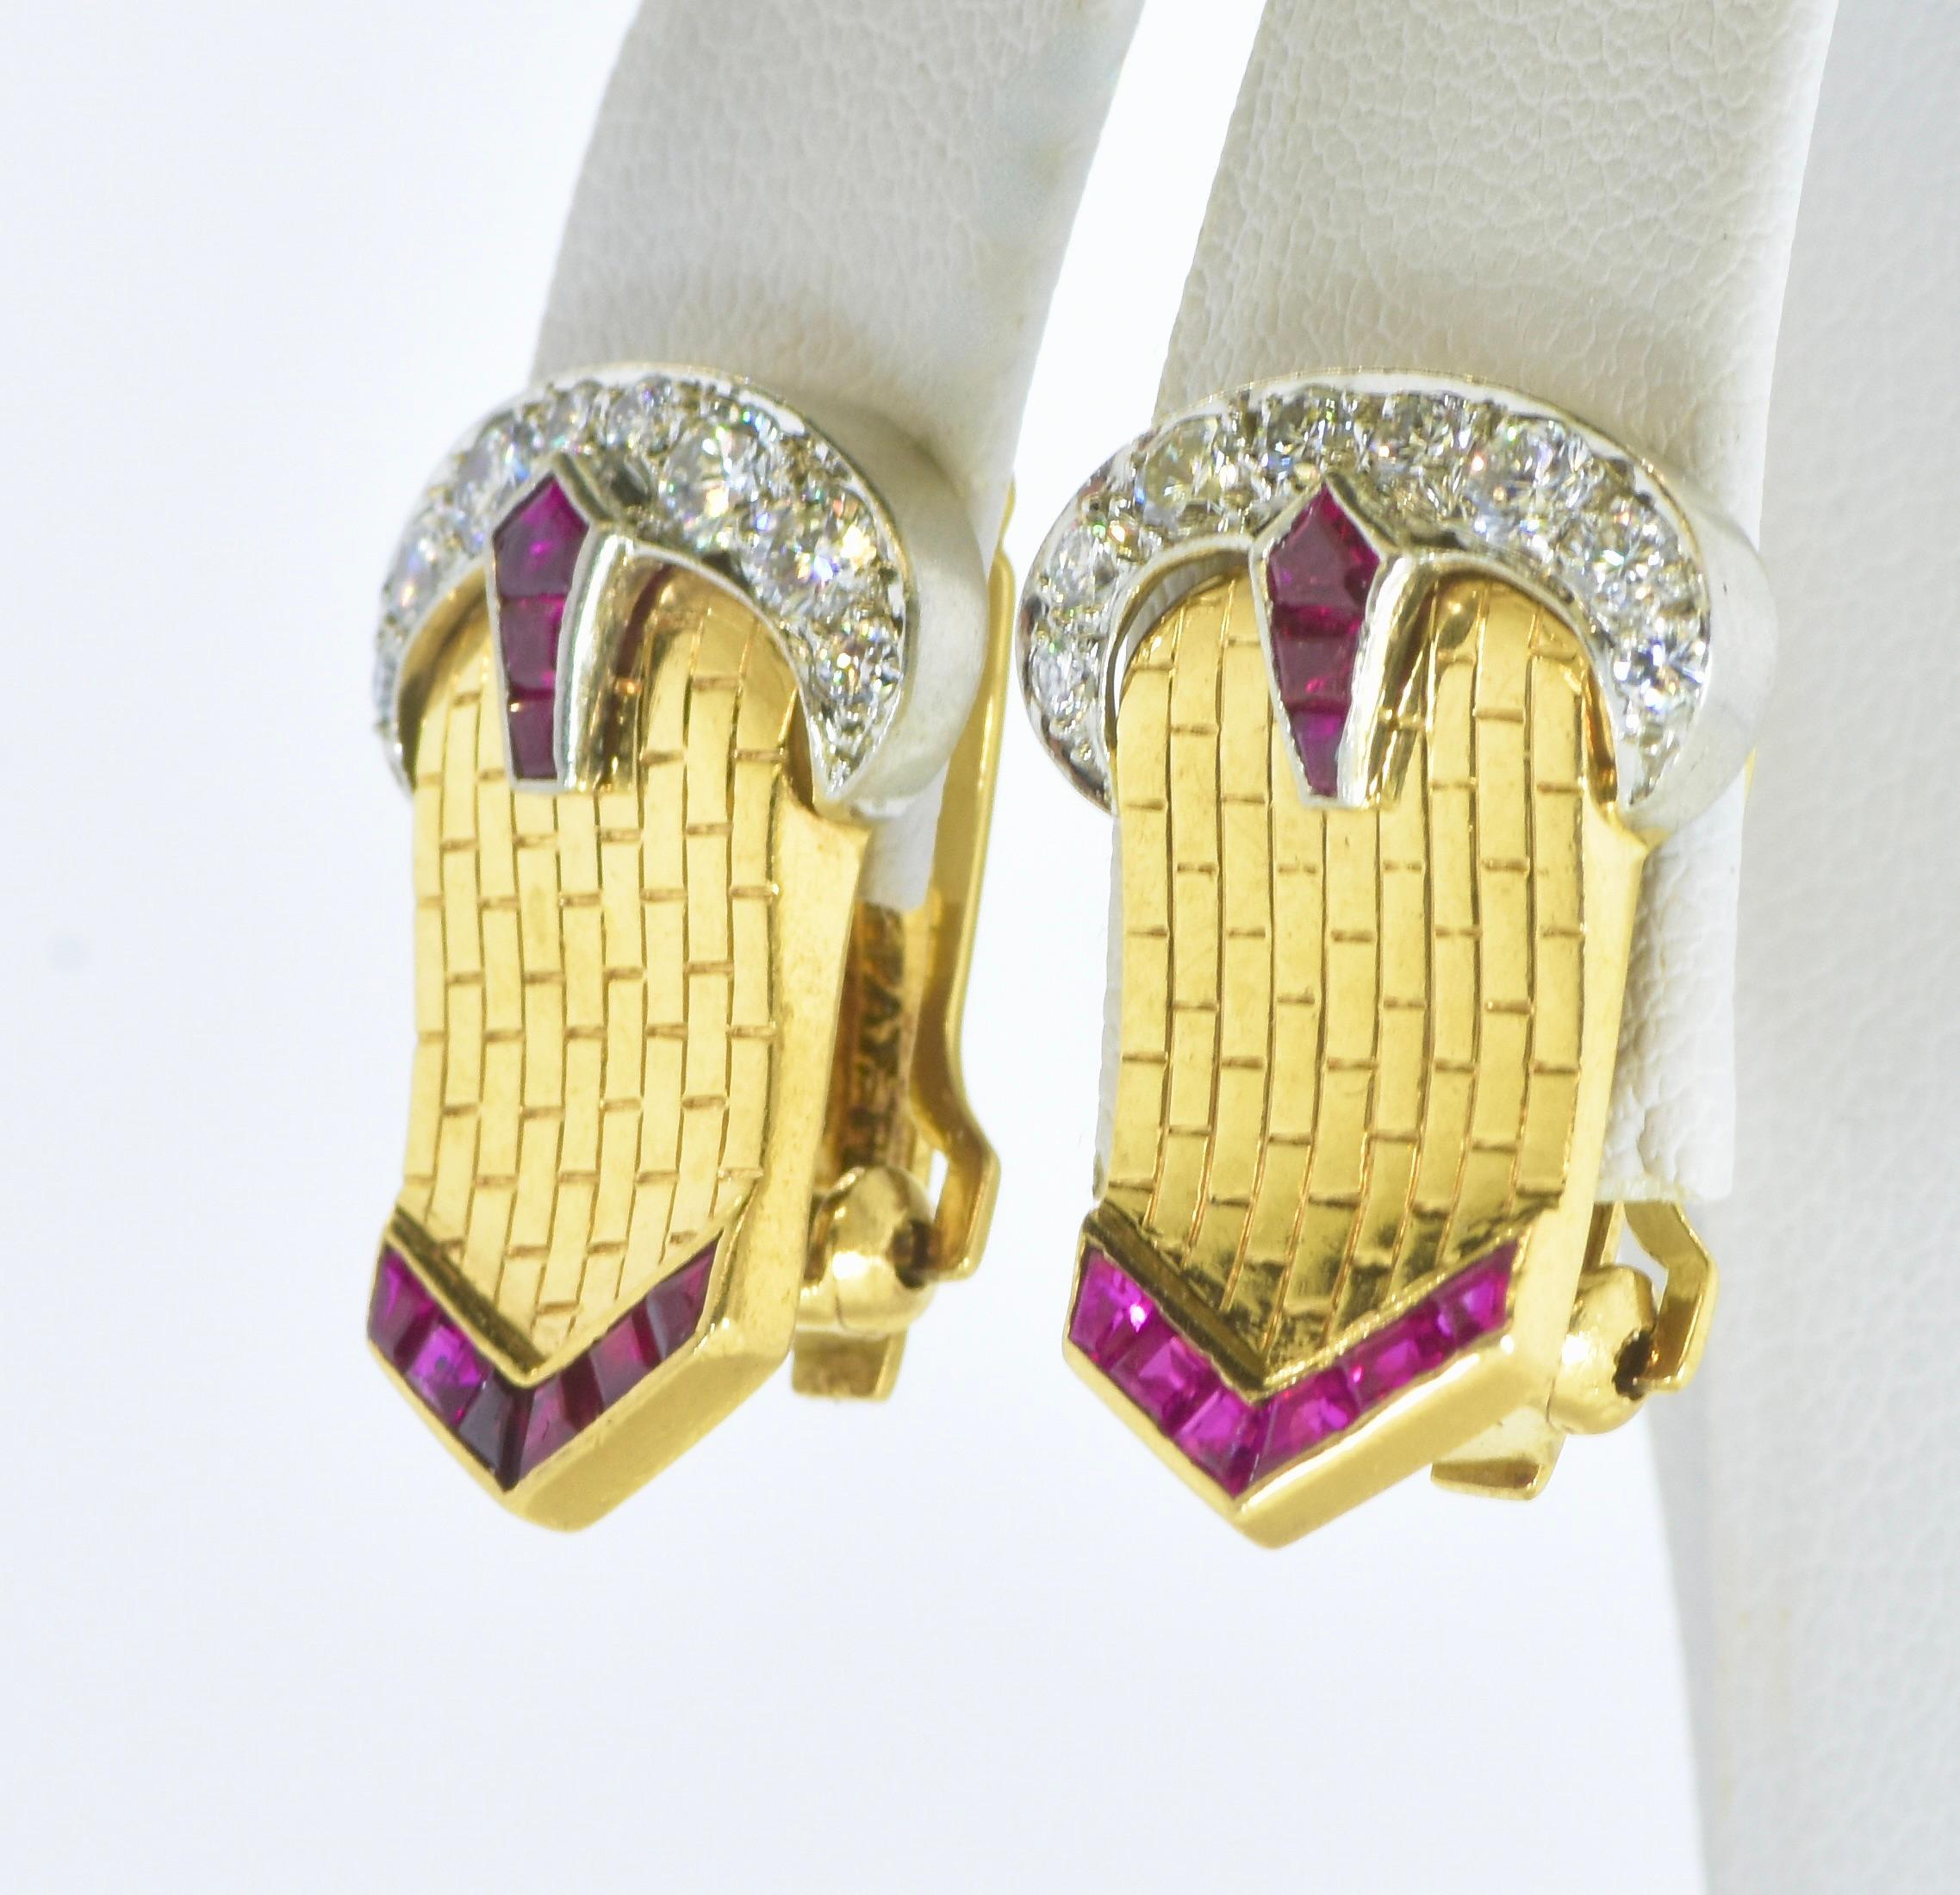 Brilliant Cut Ruby and Diamond Platinum and Gold Earrings, Vintage Retro Style, c. 1948